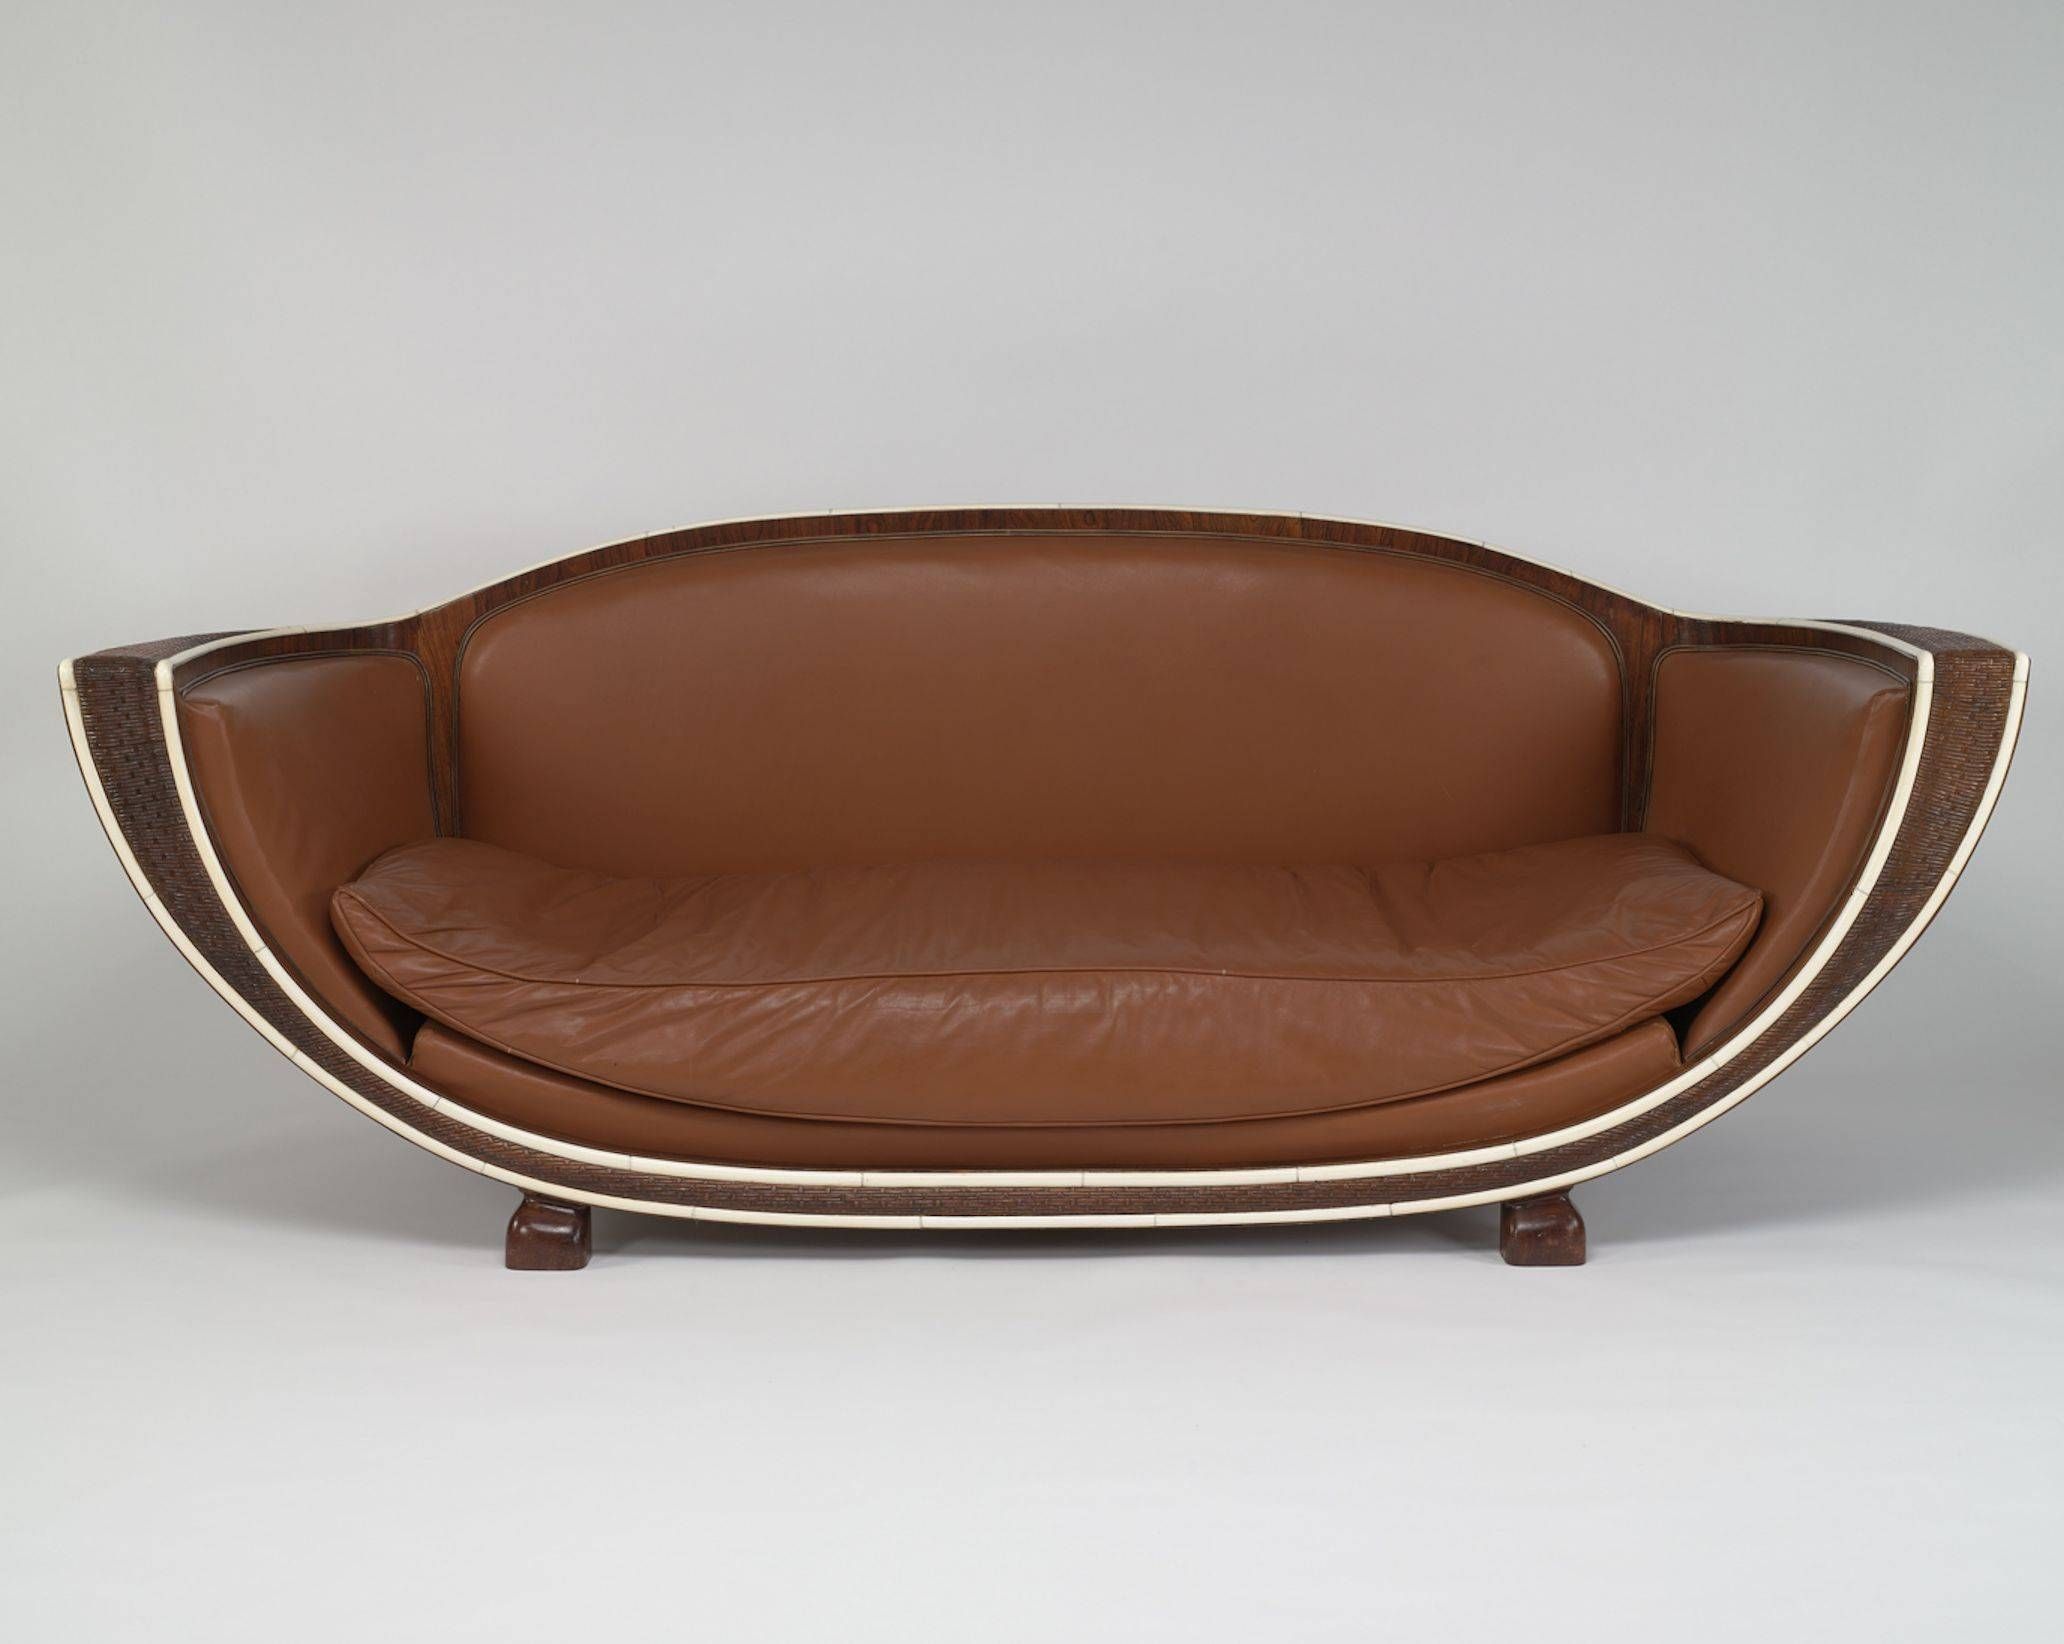 Sofas Center : Exceptional Streamlined Art Decofa With Exotic Wood Throughout 1930s Sofas (View 26 of 30)